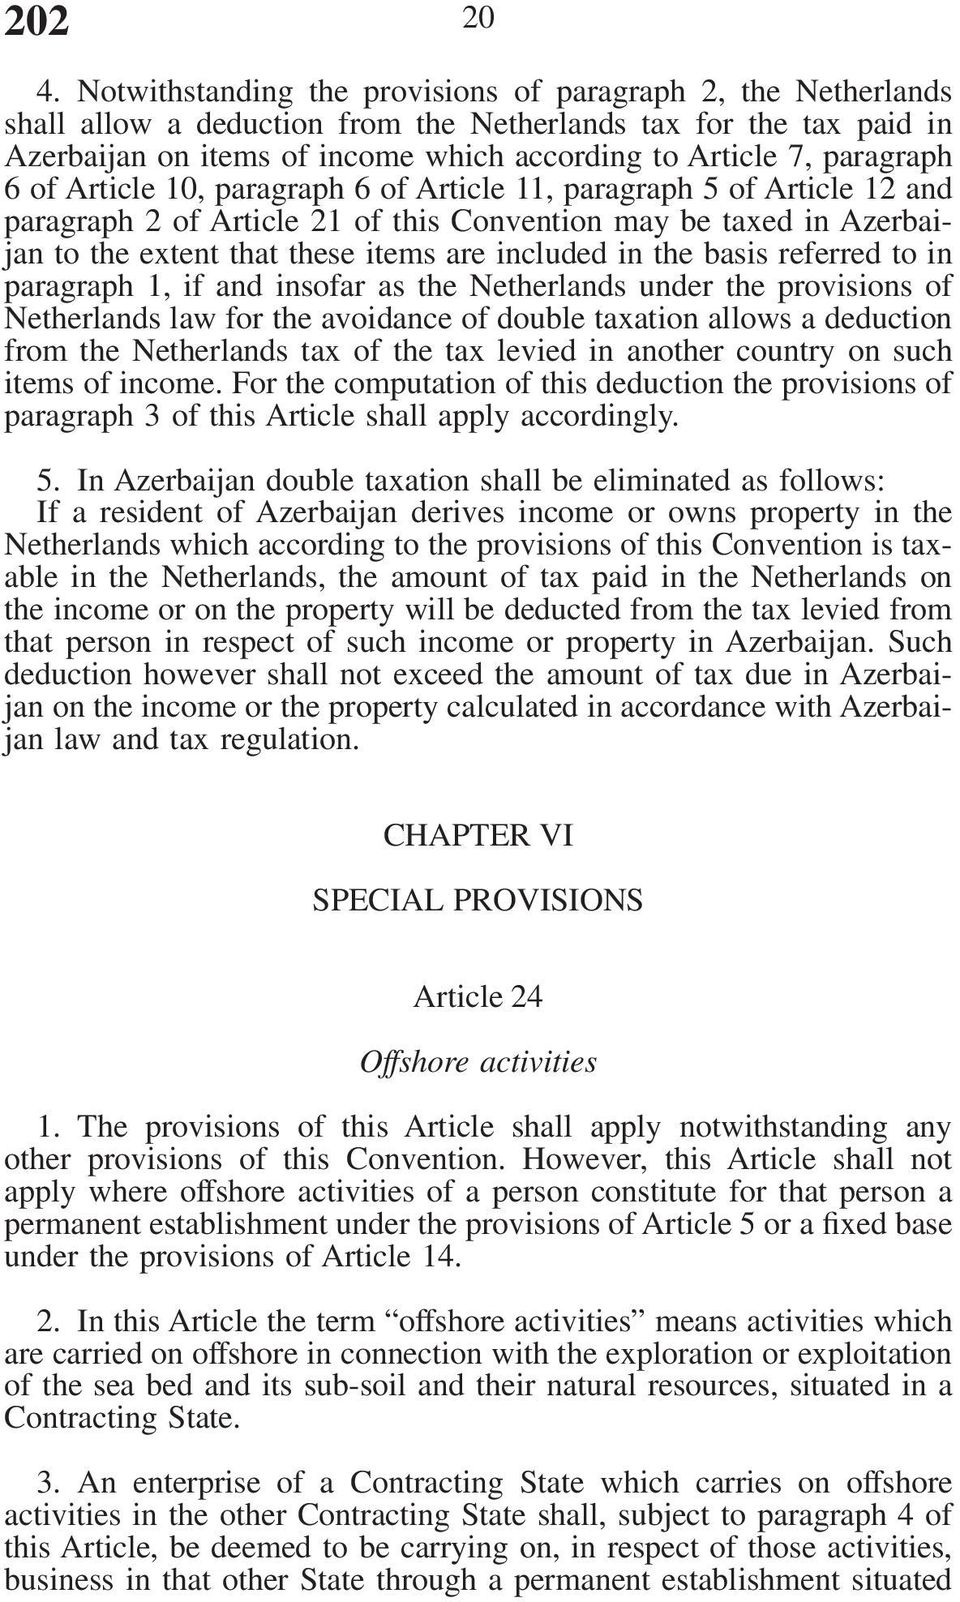 paragraph 6 of Article 10, paragraph 6 of Article 11, paragraph 5 of Article 12 and paragraph 2 of Article 21 of this Convention may be taxed in Azerbaijan to the extent that these items are included